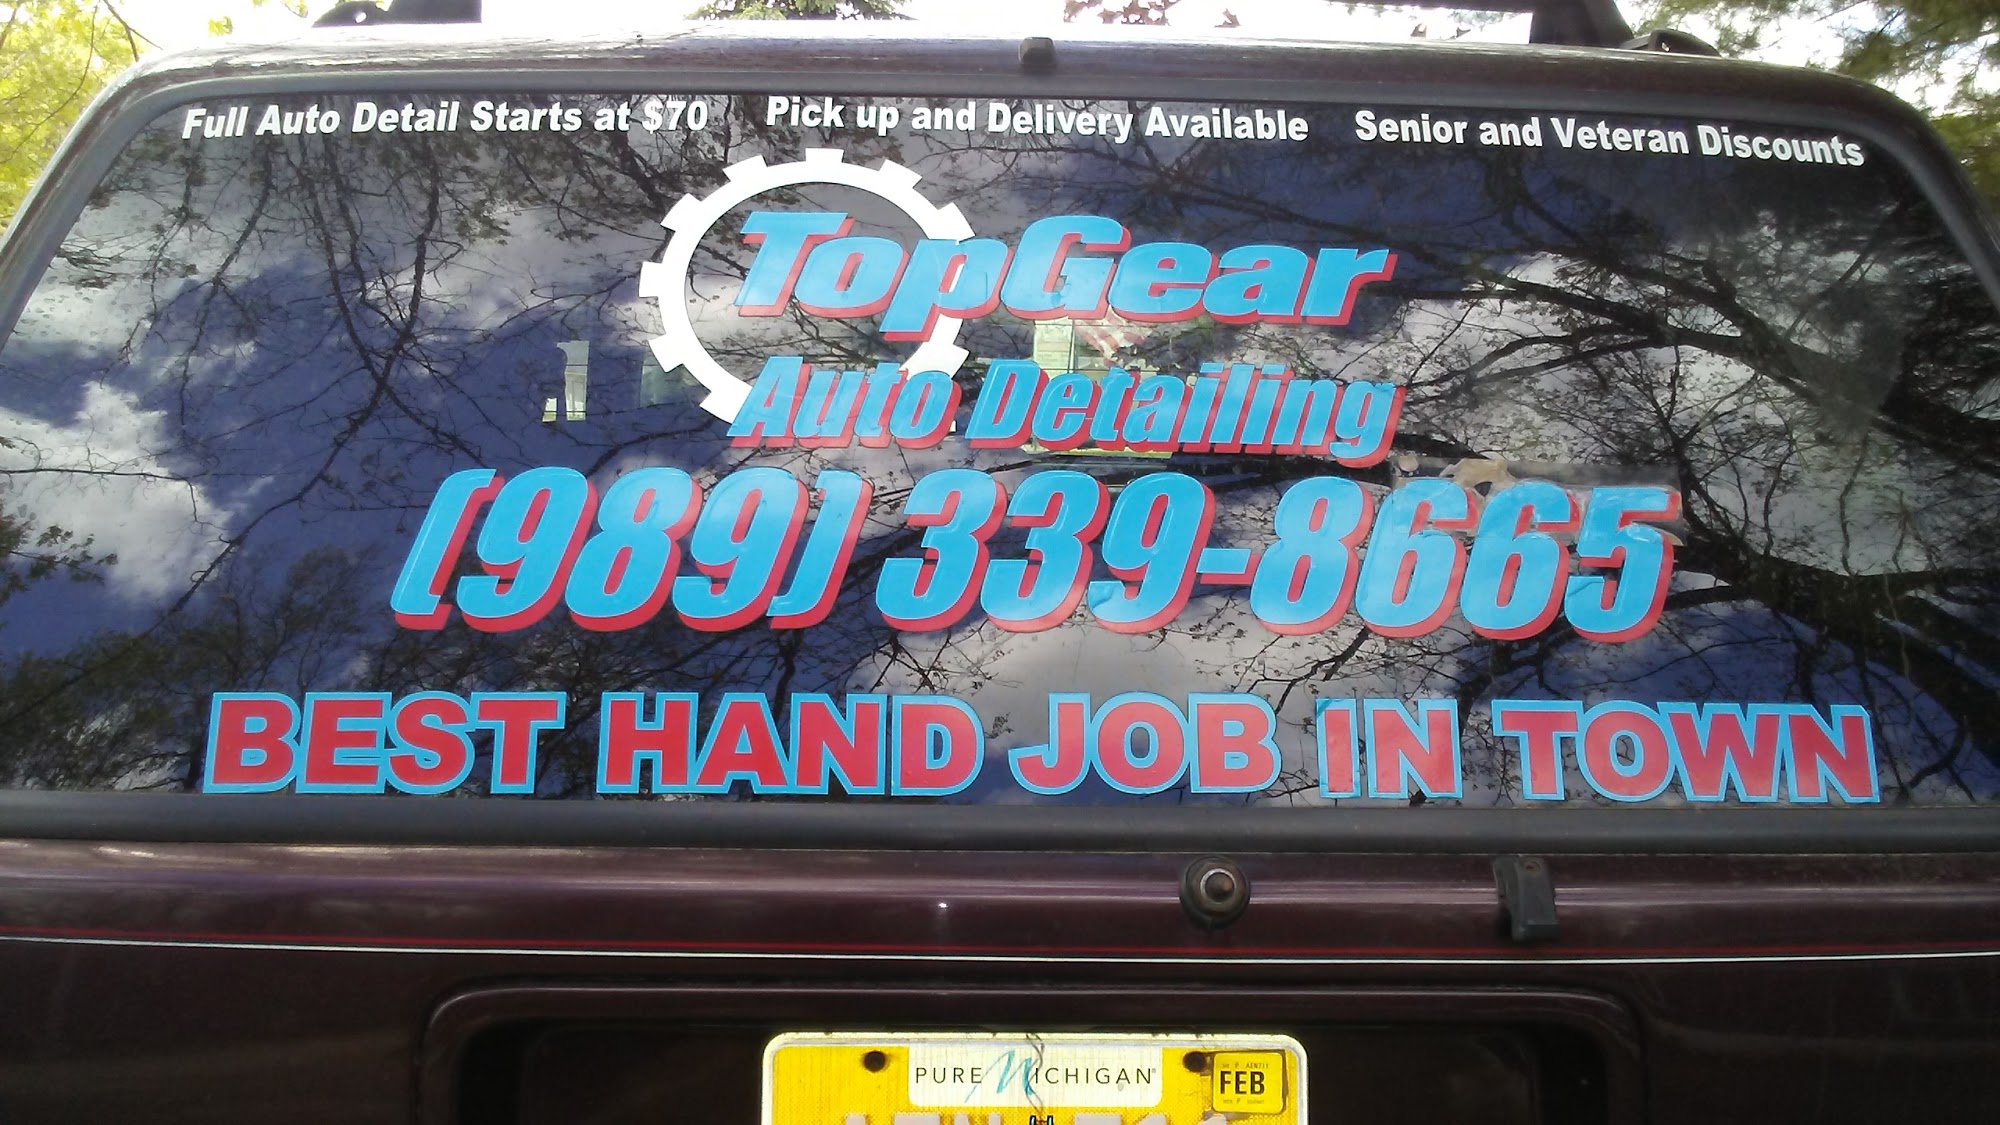 Top Gear Auto Detailing